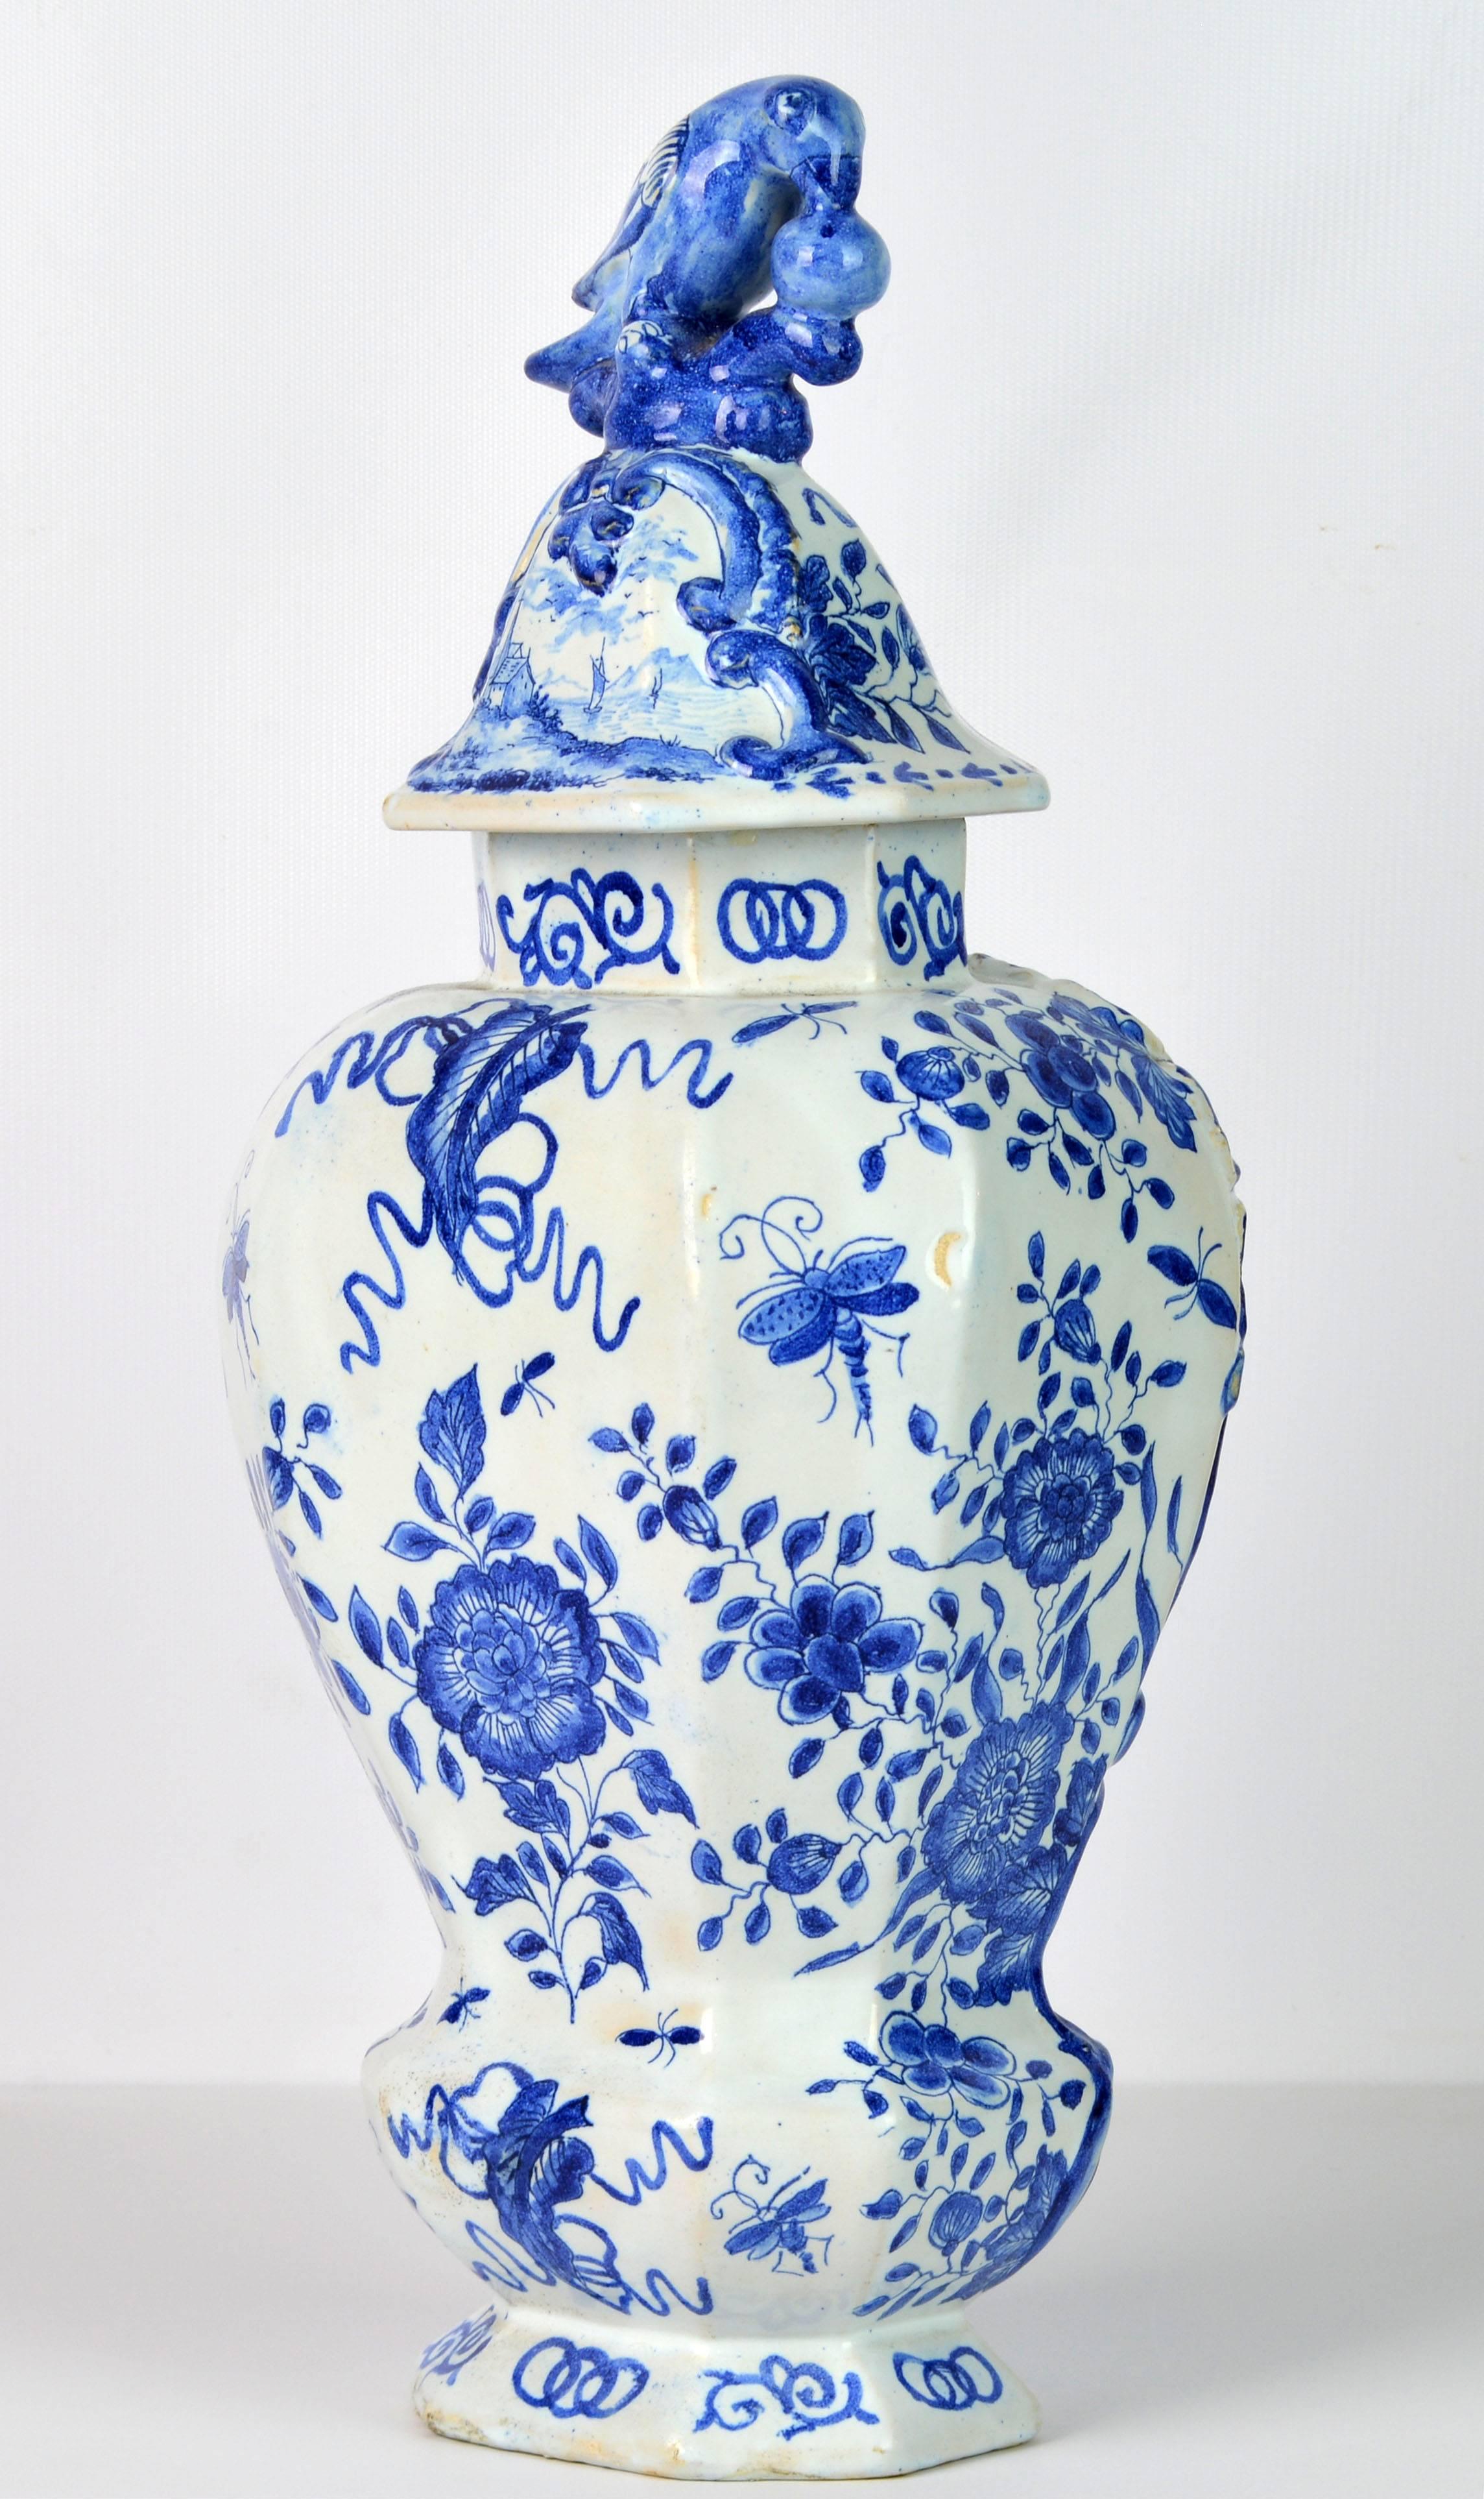 Rococo Blue and White 18th Century Delft Pottery Covered Octagonal Jar with Bird Finial